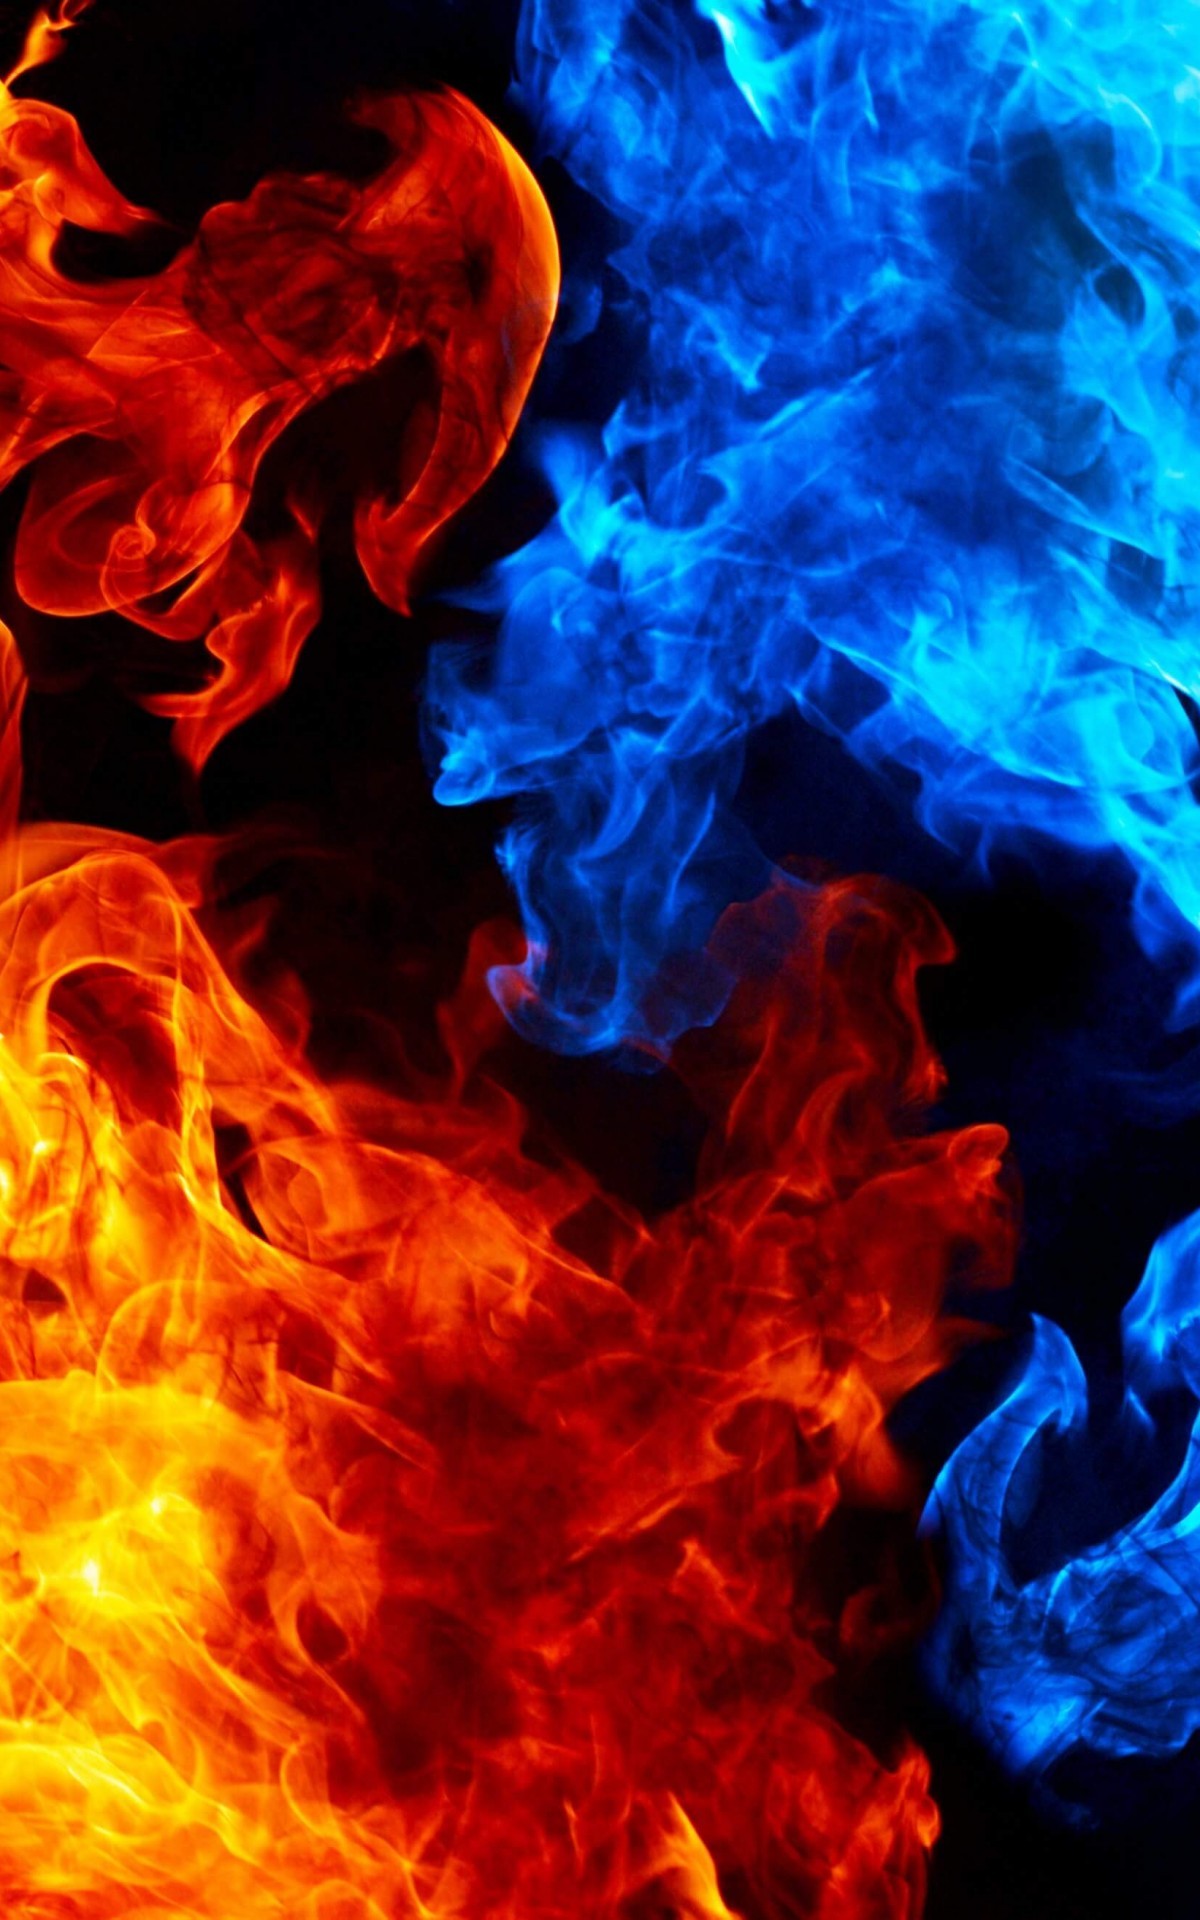 Free download Blue and Red Fire Wallpaper 65 images [1200x1920] for